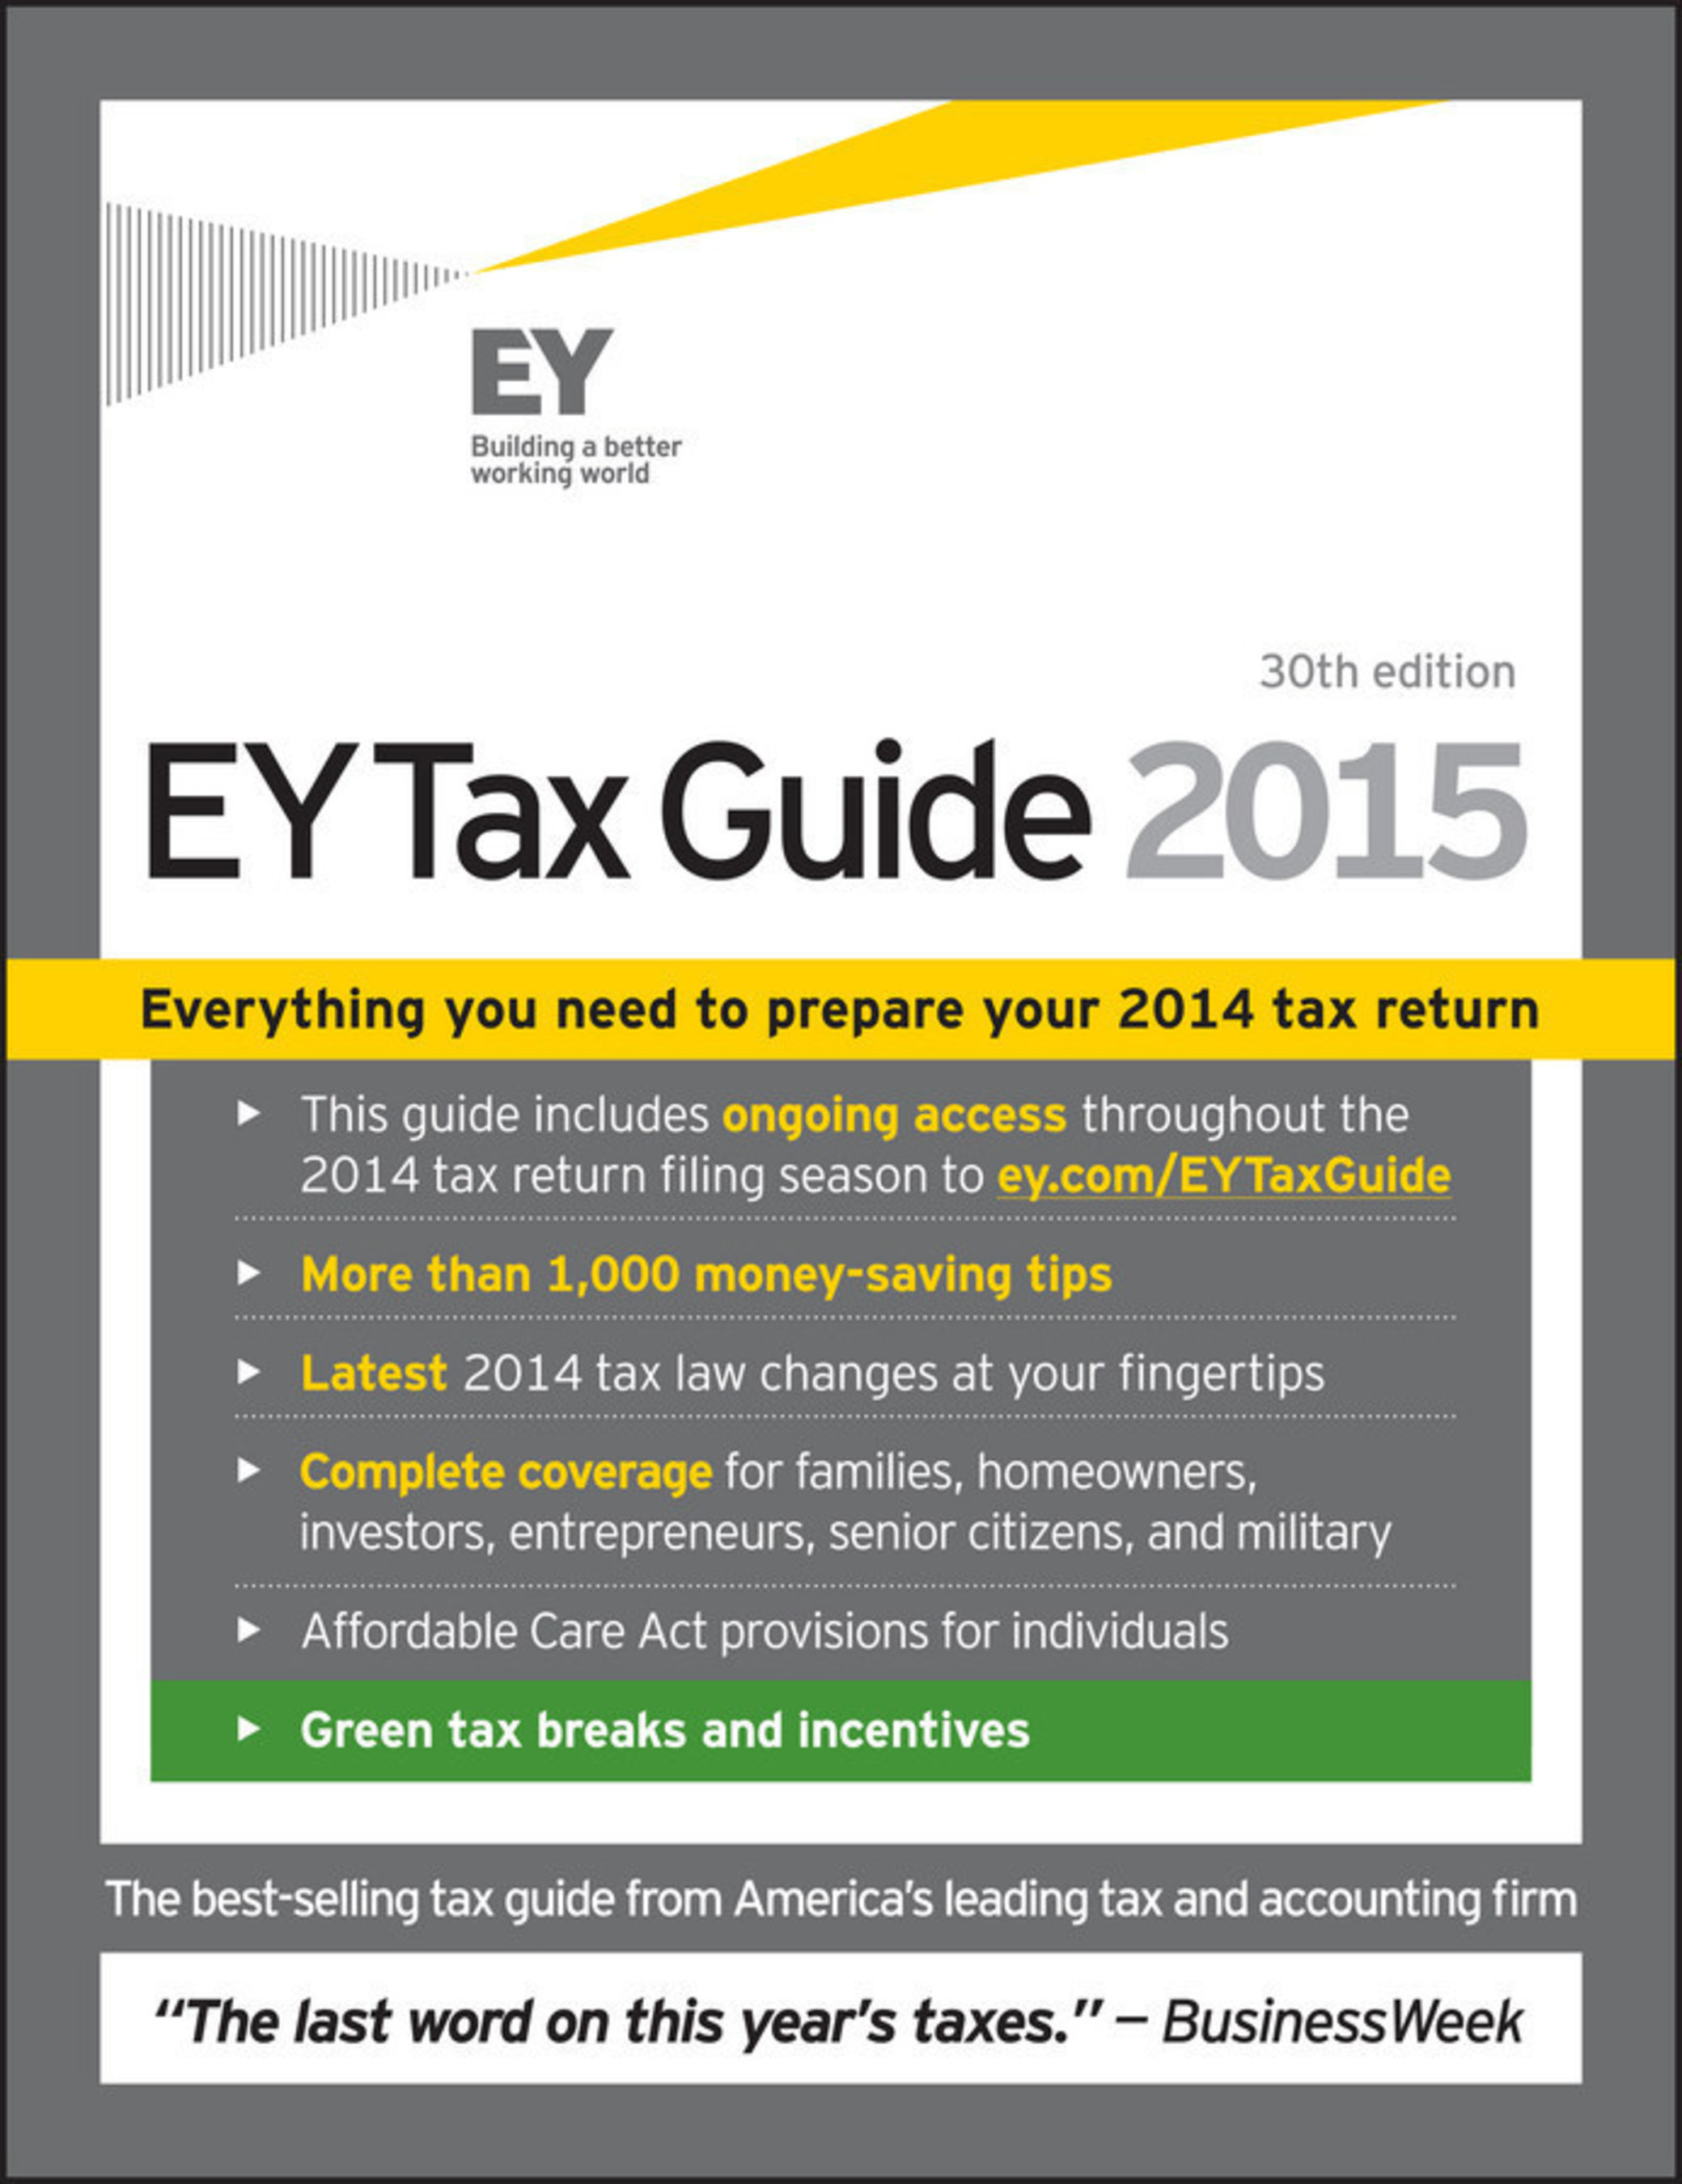 30th Edition Provides Valuable Insight for Taxpayers Preparing 2014 Returns